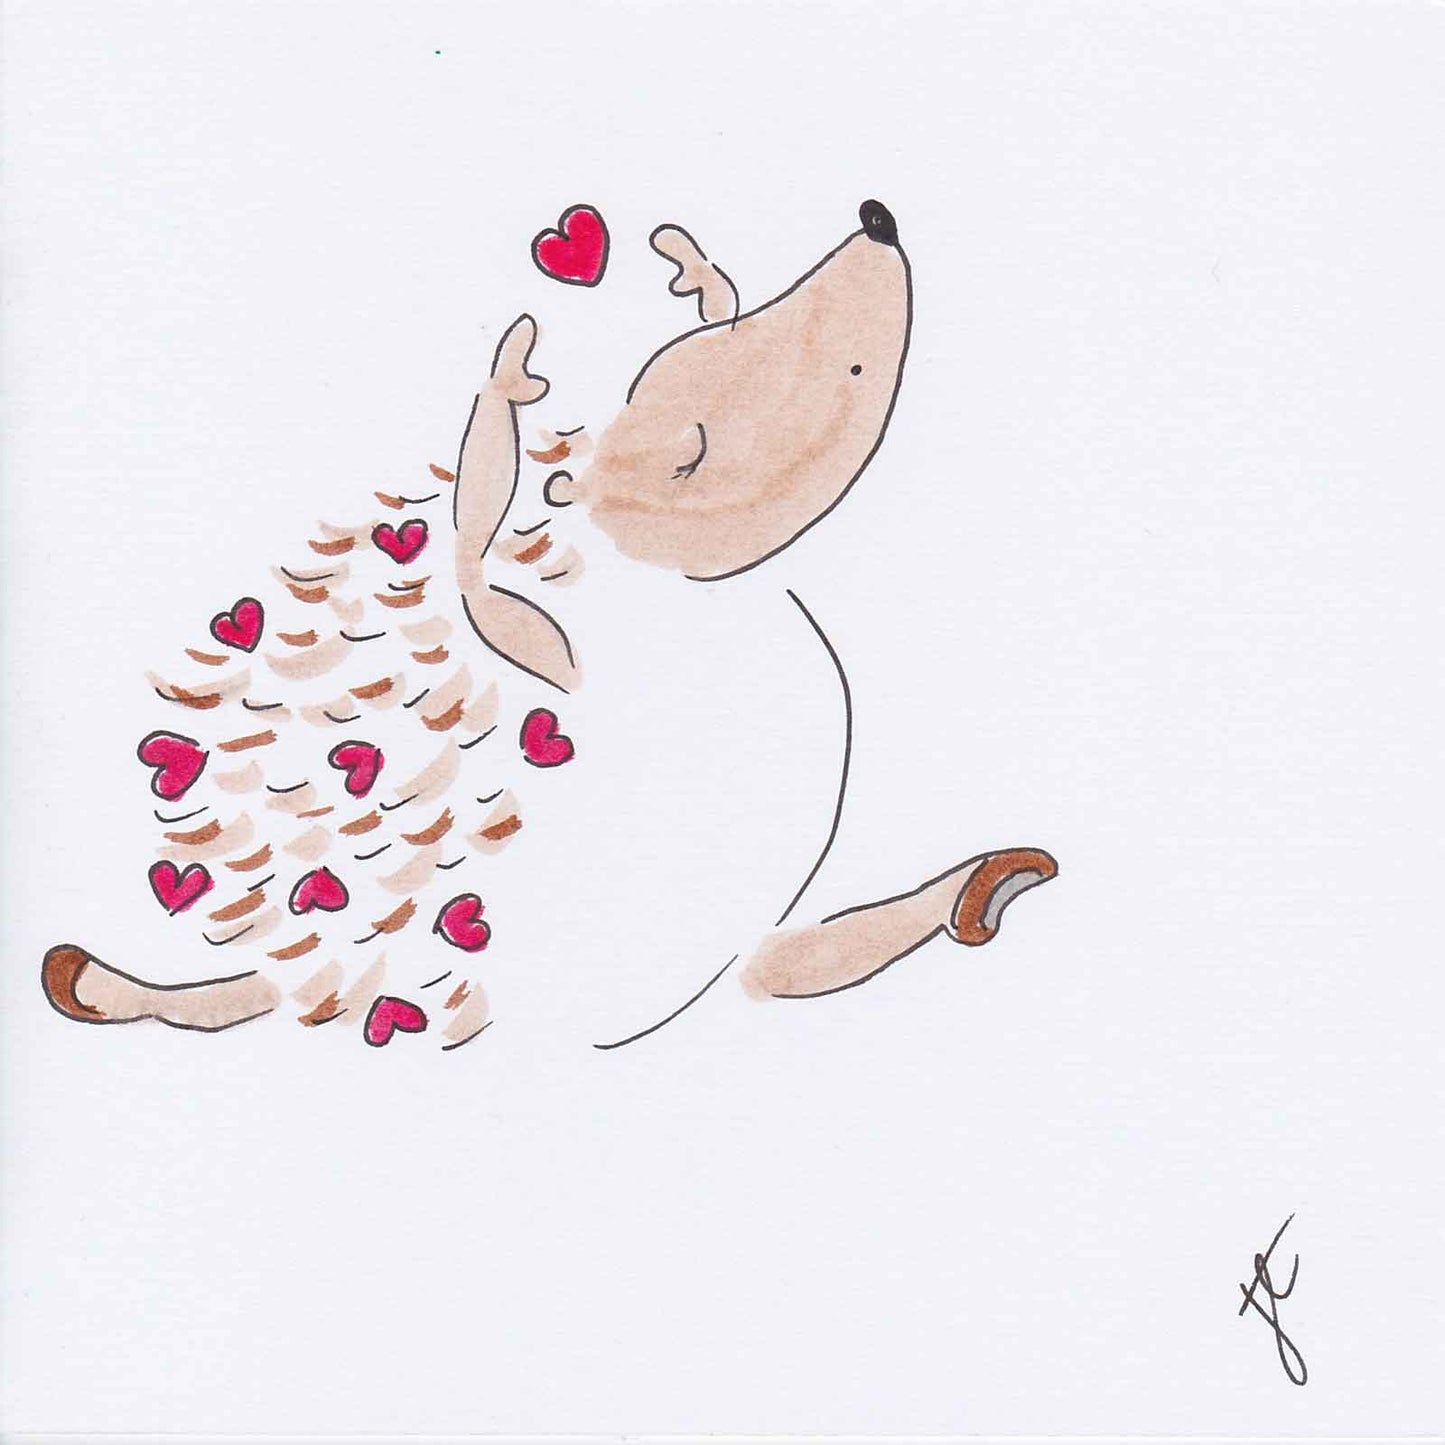 Ballettoons Hedgie illustration with a dancing hedgehog mid-jete and hearts in their spikes.